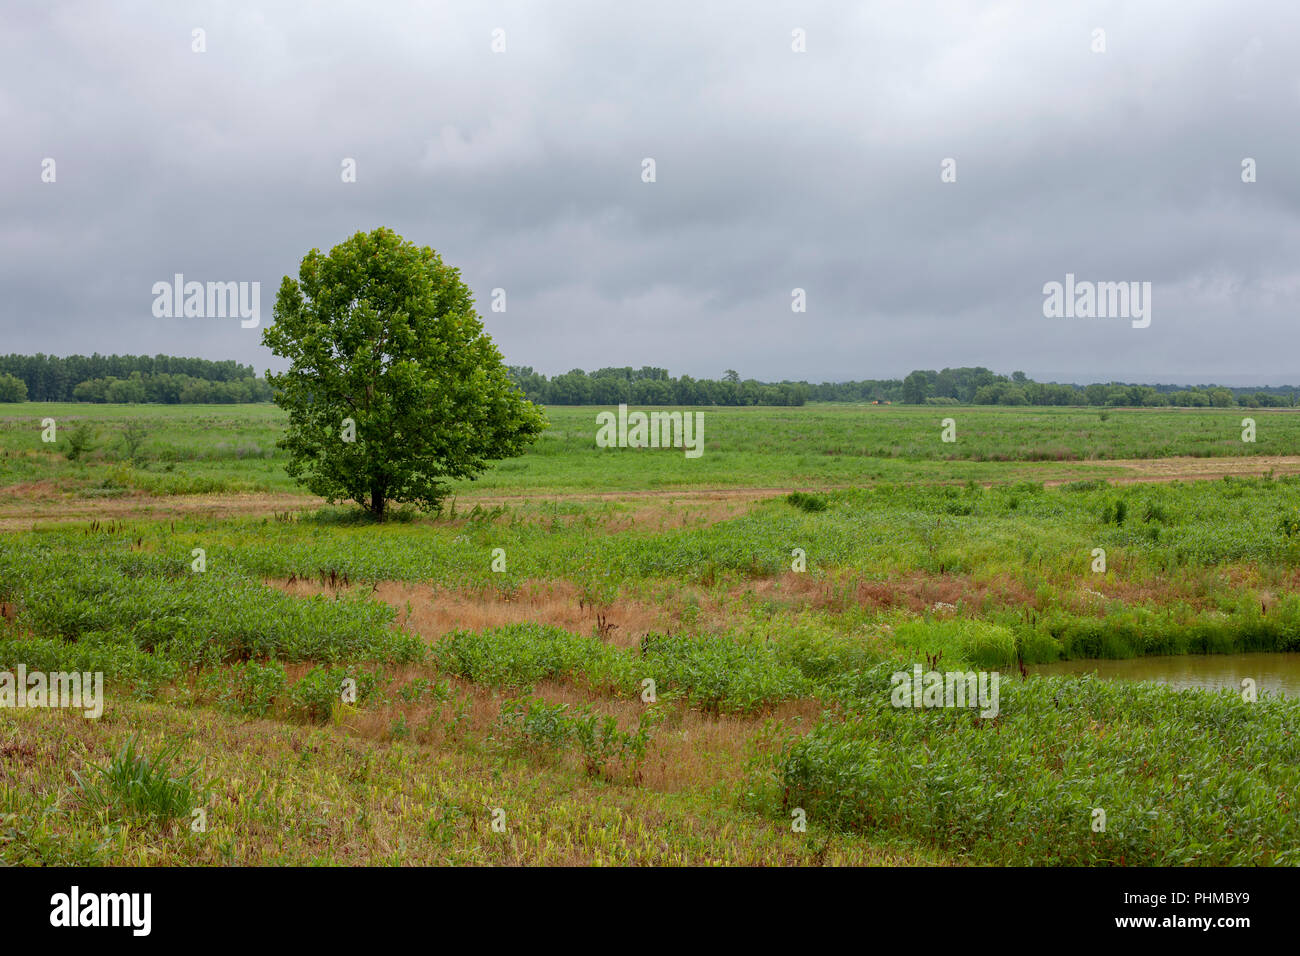 Scene dal cannone di Clarence National Wildlife Refuge Area in Pike County, Missouri. Foto Stock